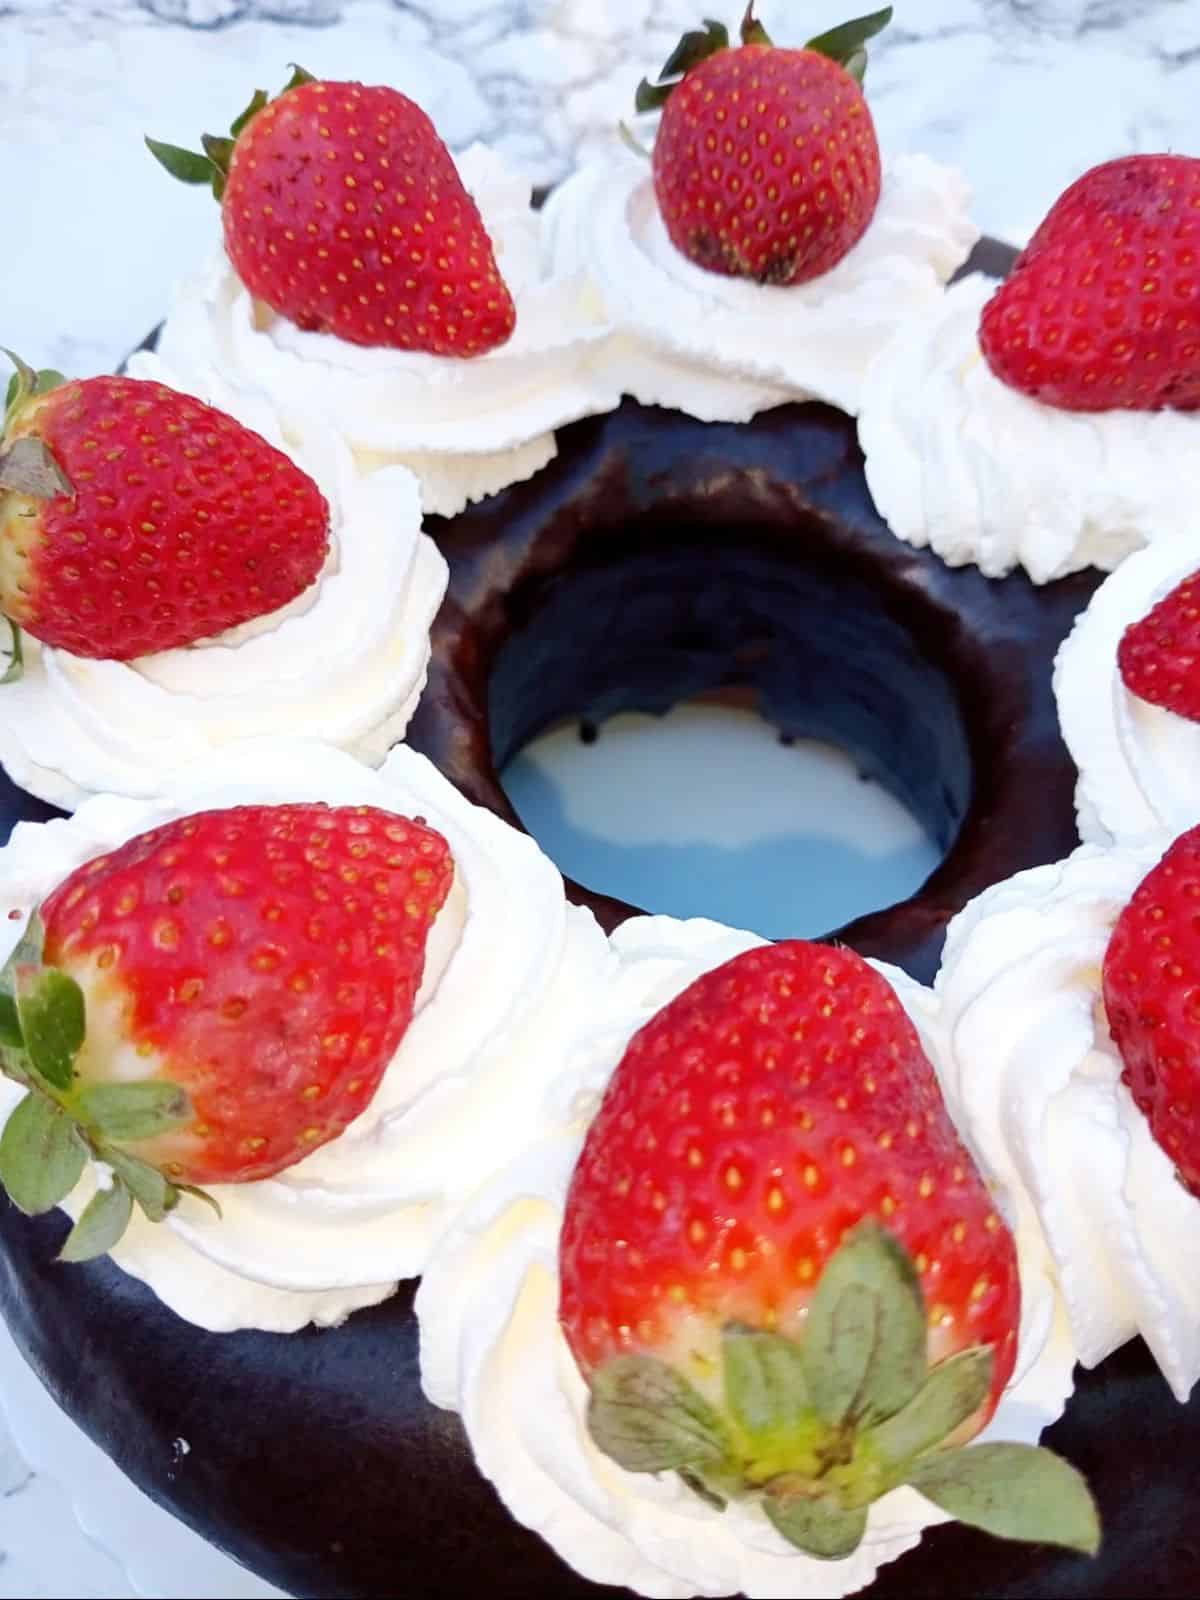 Moist and fluffy Yogurt Cake covered in Chocolate Ganache topped with Fresh Cream and Dtrawberries